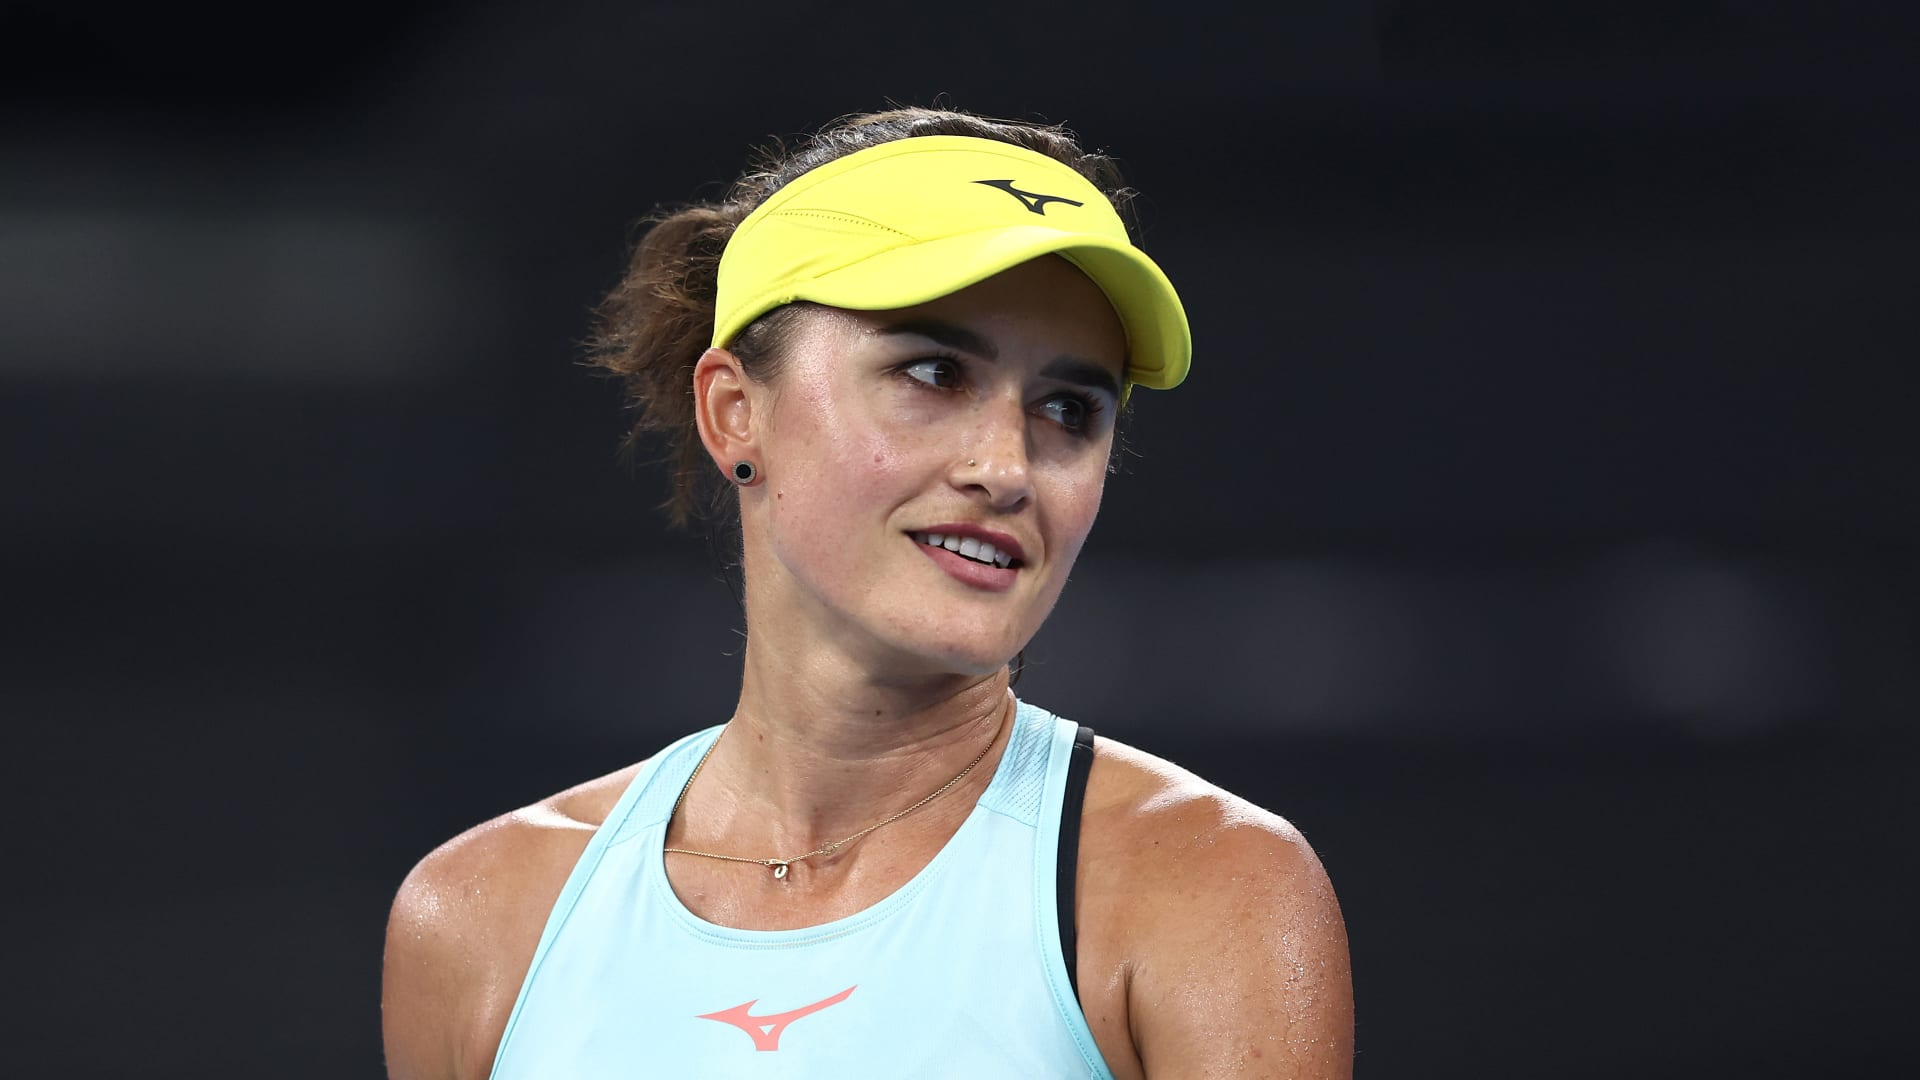 ‘Wish I could say I’m surprised’: Aussie No. 1 snubbed for wildcard